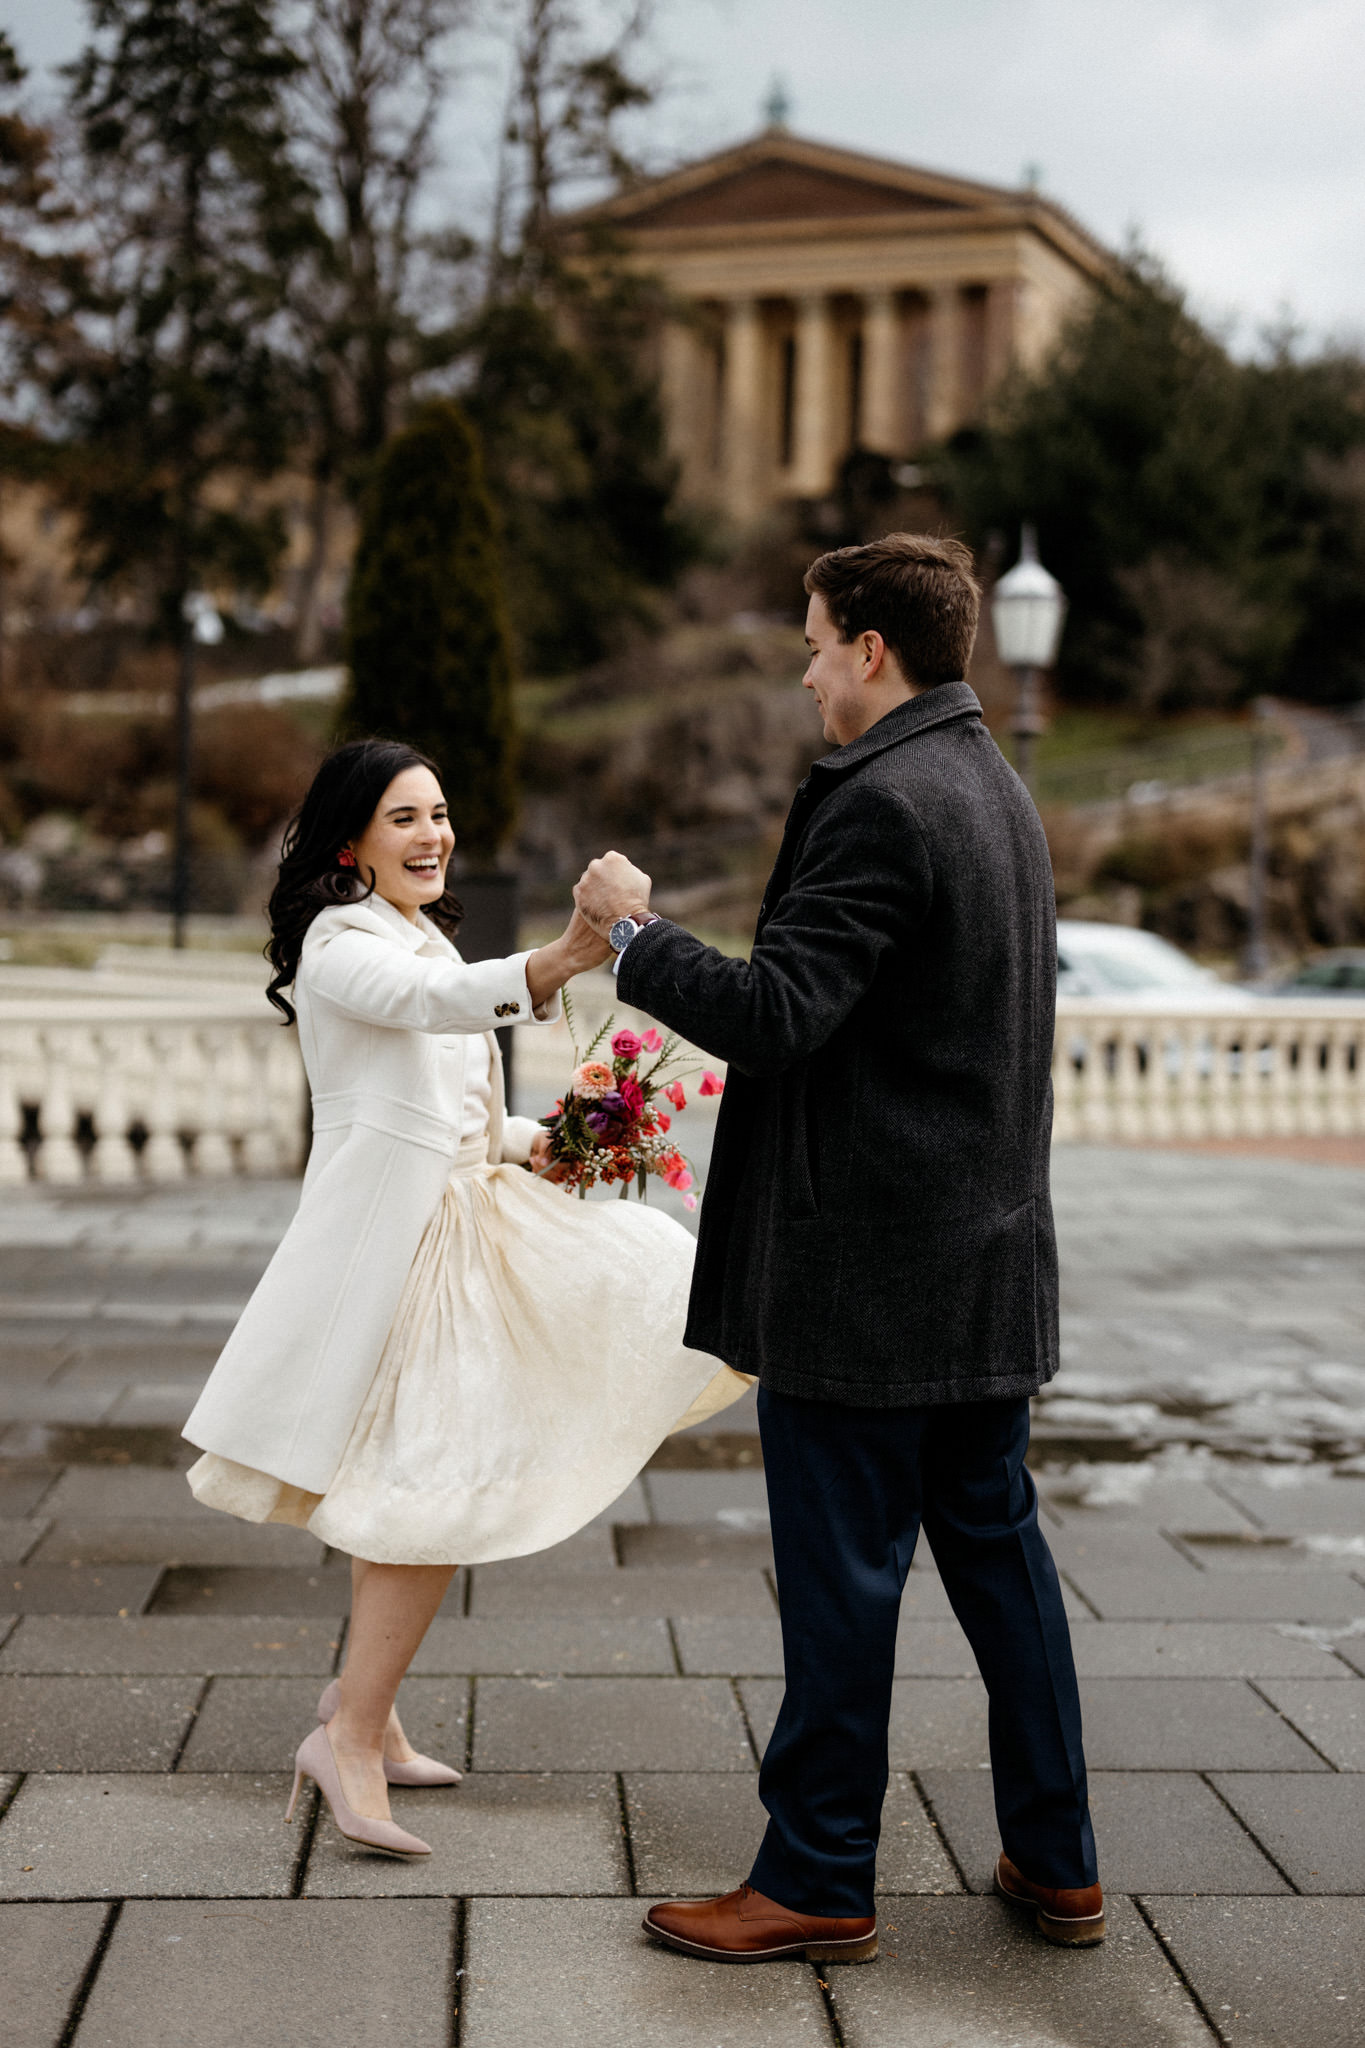 The newly-weds are dancing outdoors. Winter wedding venues image by Jenny Fu Studio